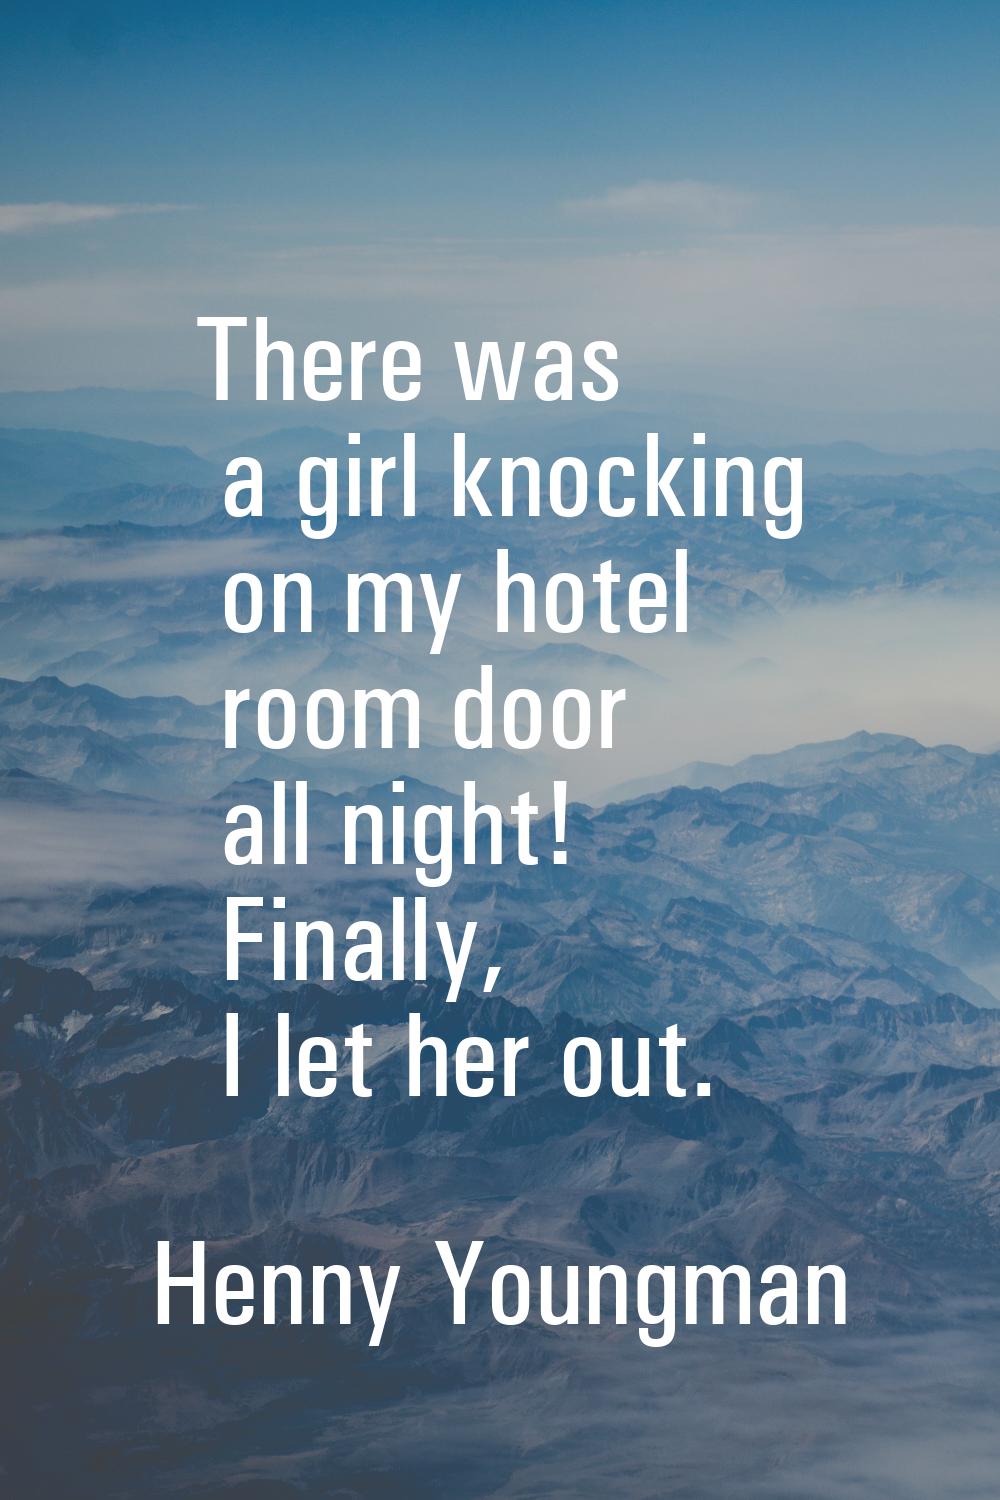 There was a girl knocking on my hotel room door all night! Finally, I let her out.